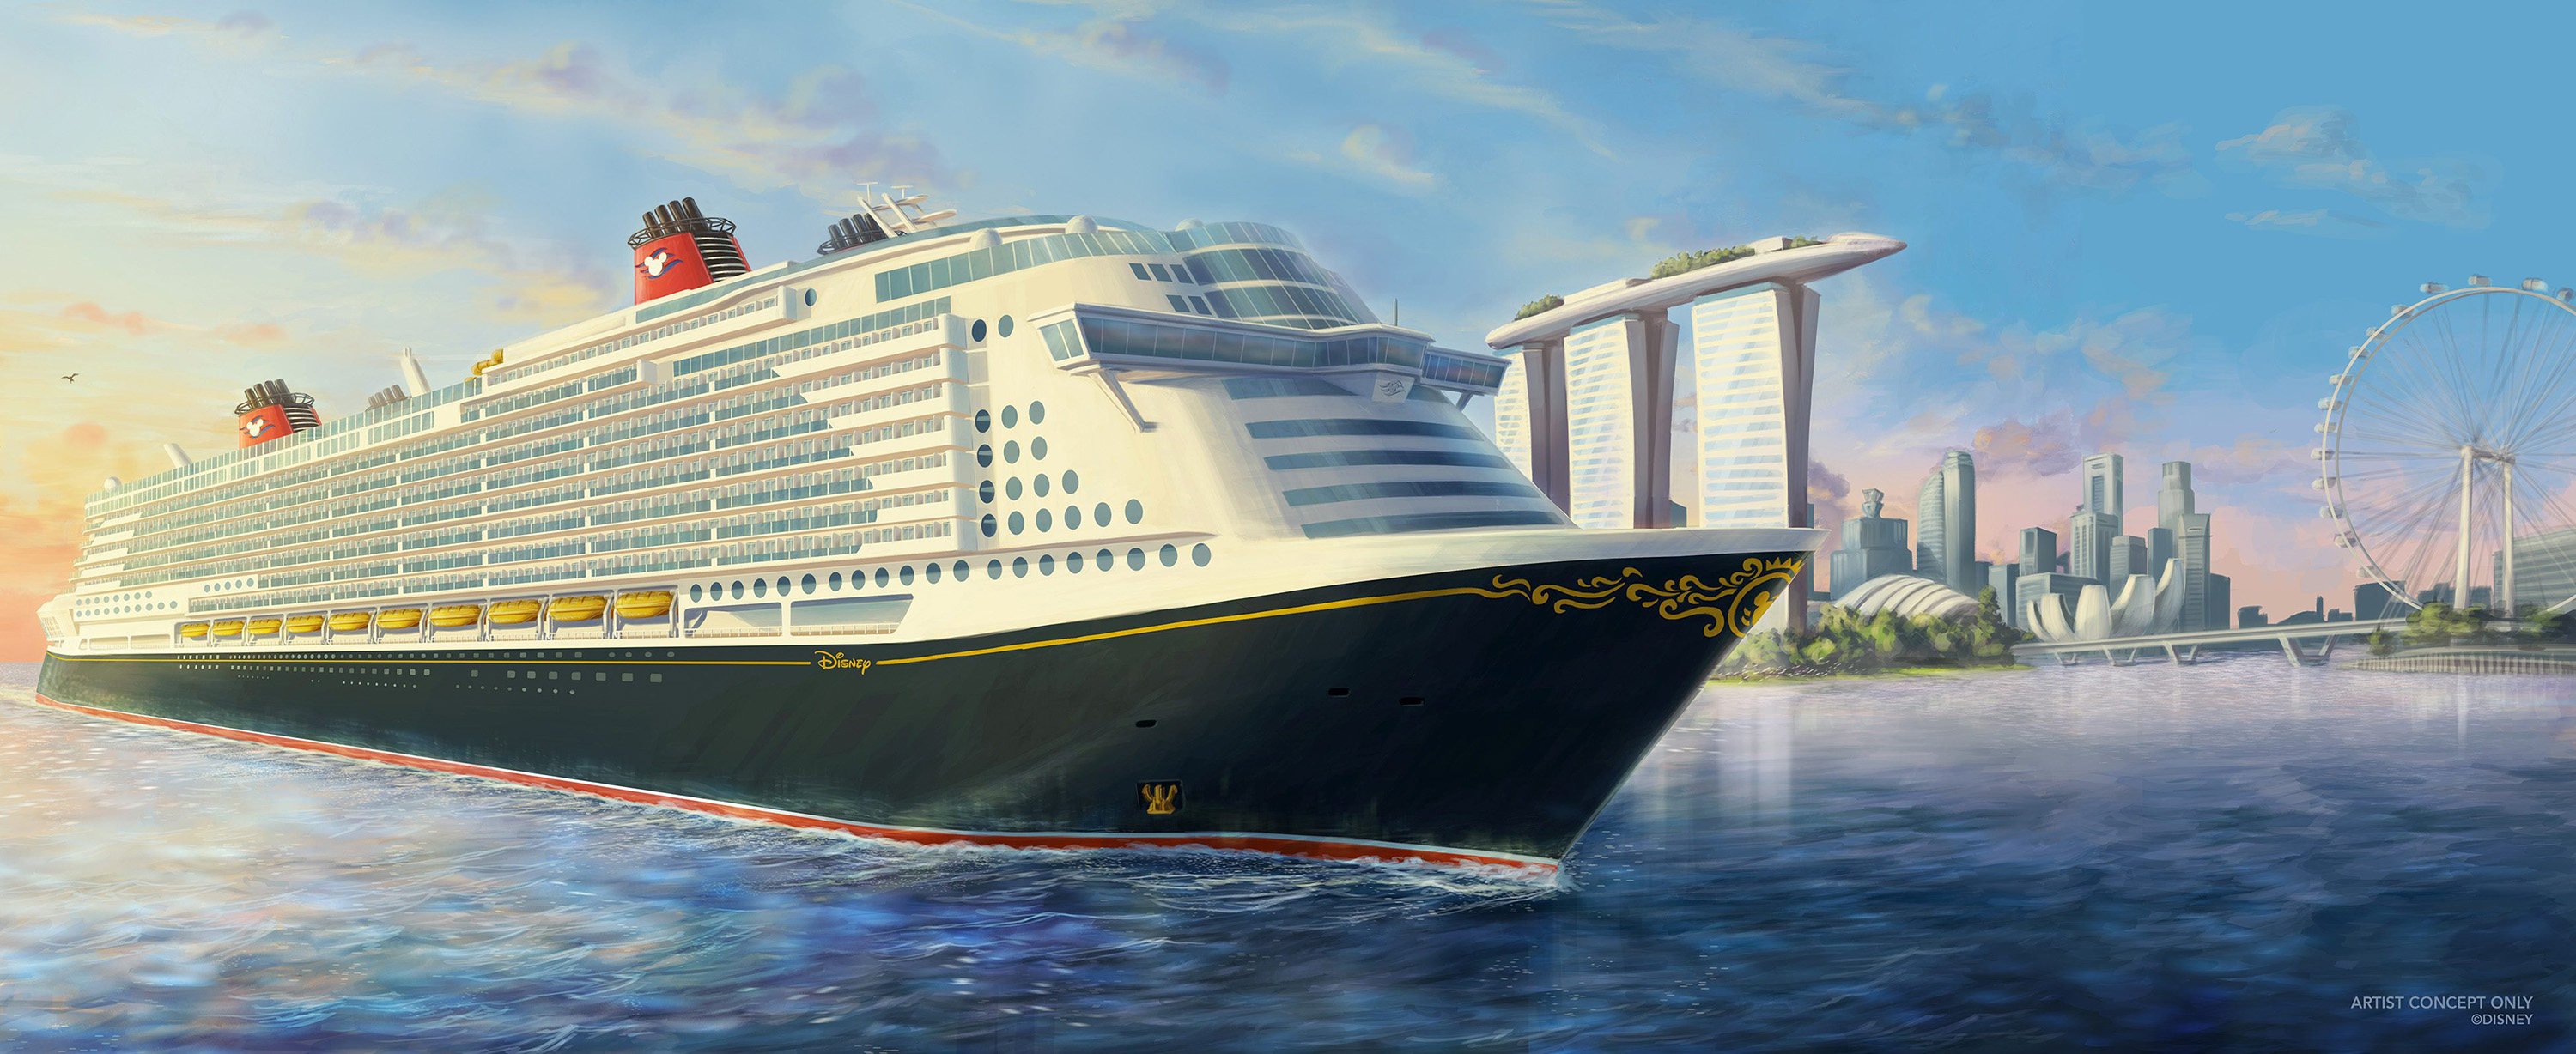 Disney Cruise Line announced it would base a new cruise ship in Singapore for five years. Photo: Disney Cruise Line/Singapore Tourism Board via YNS